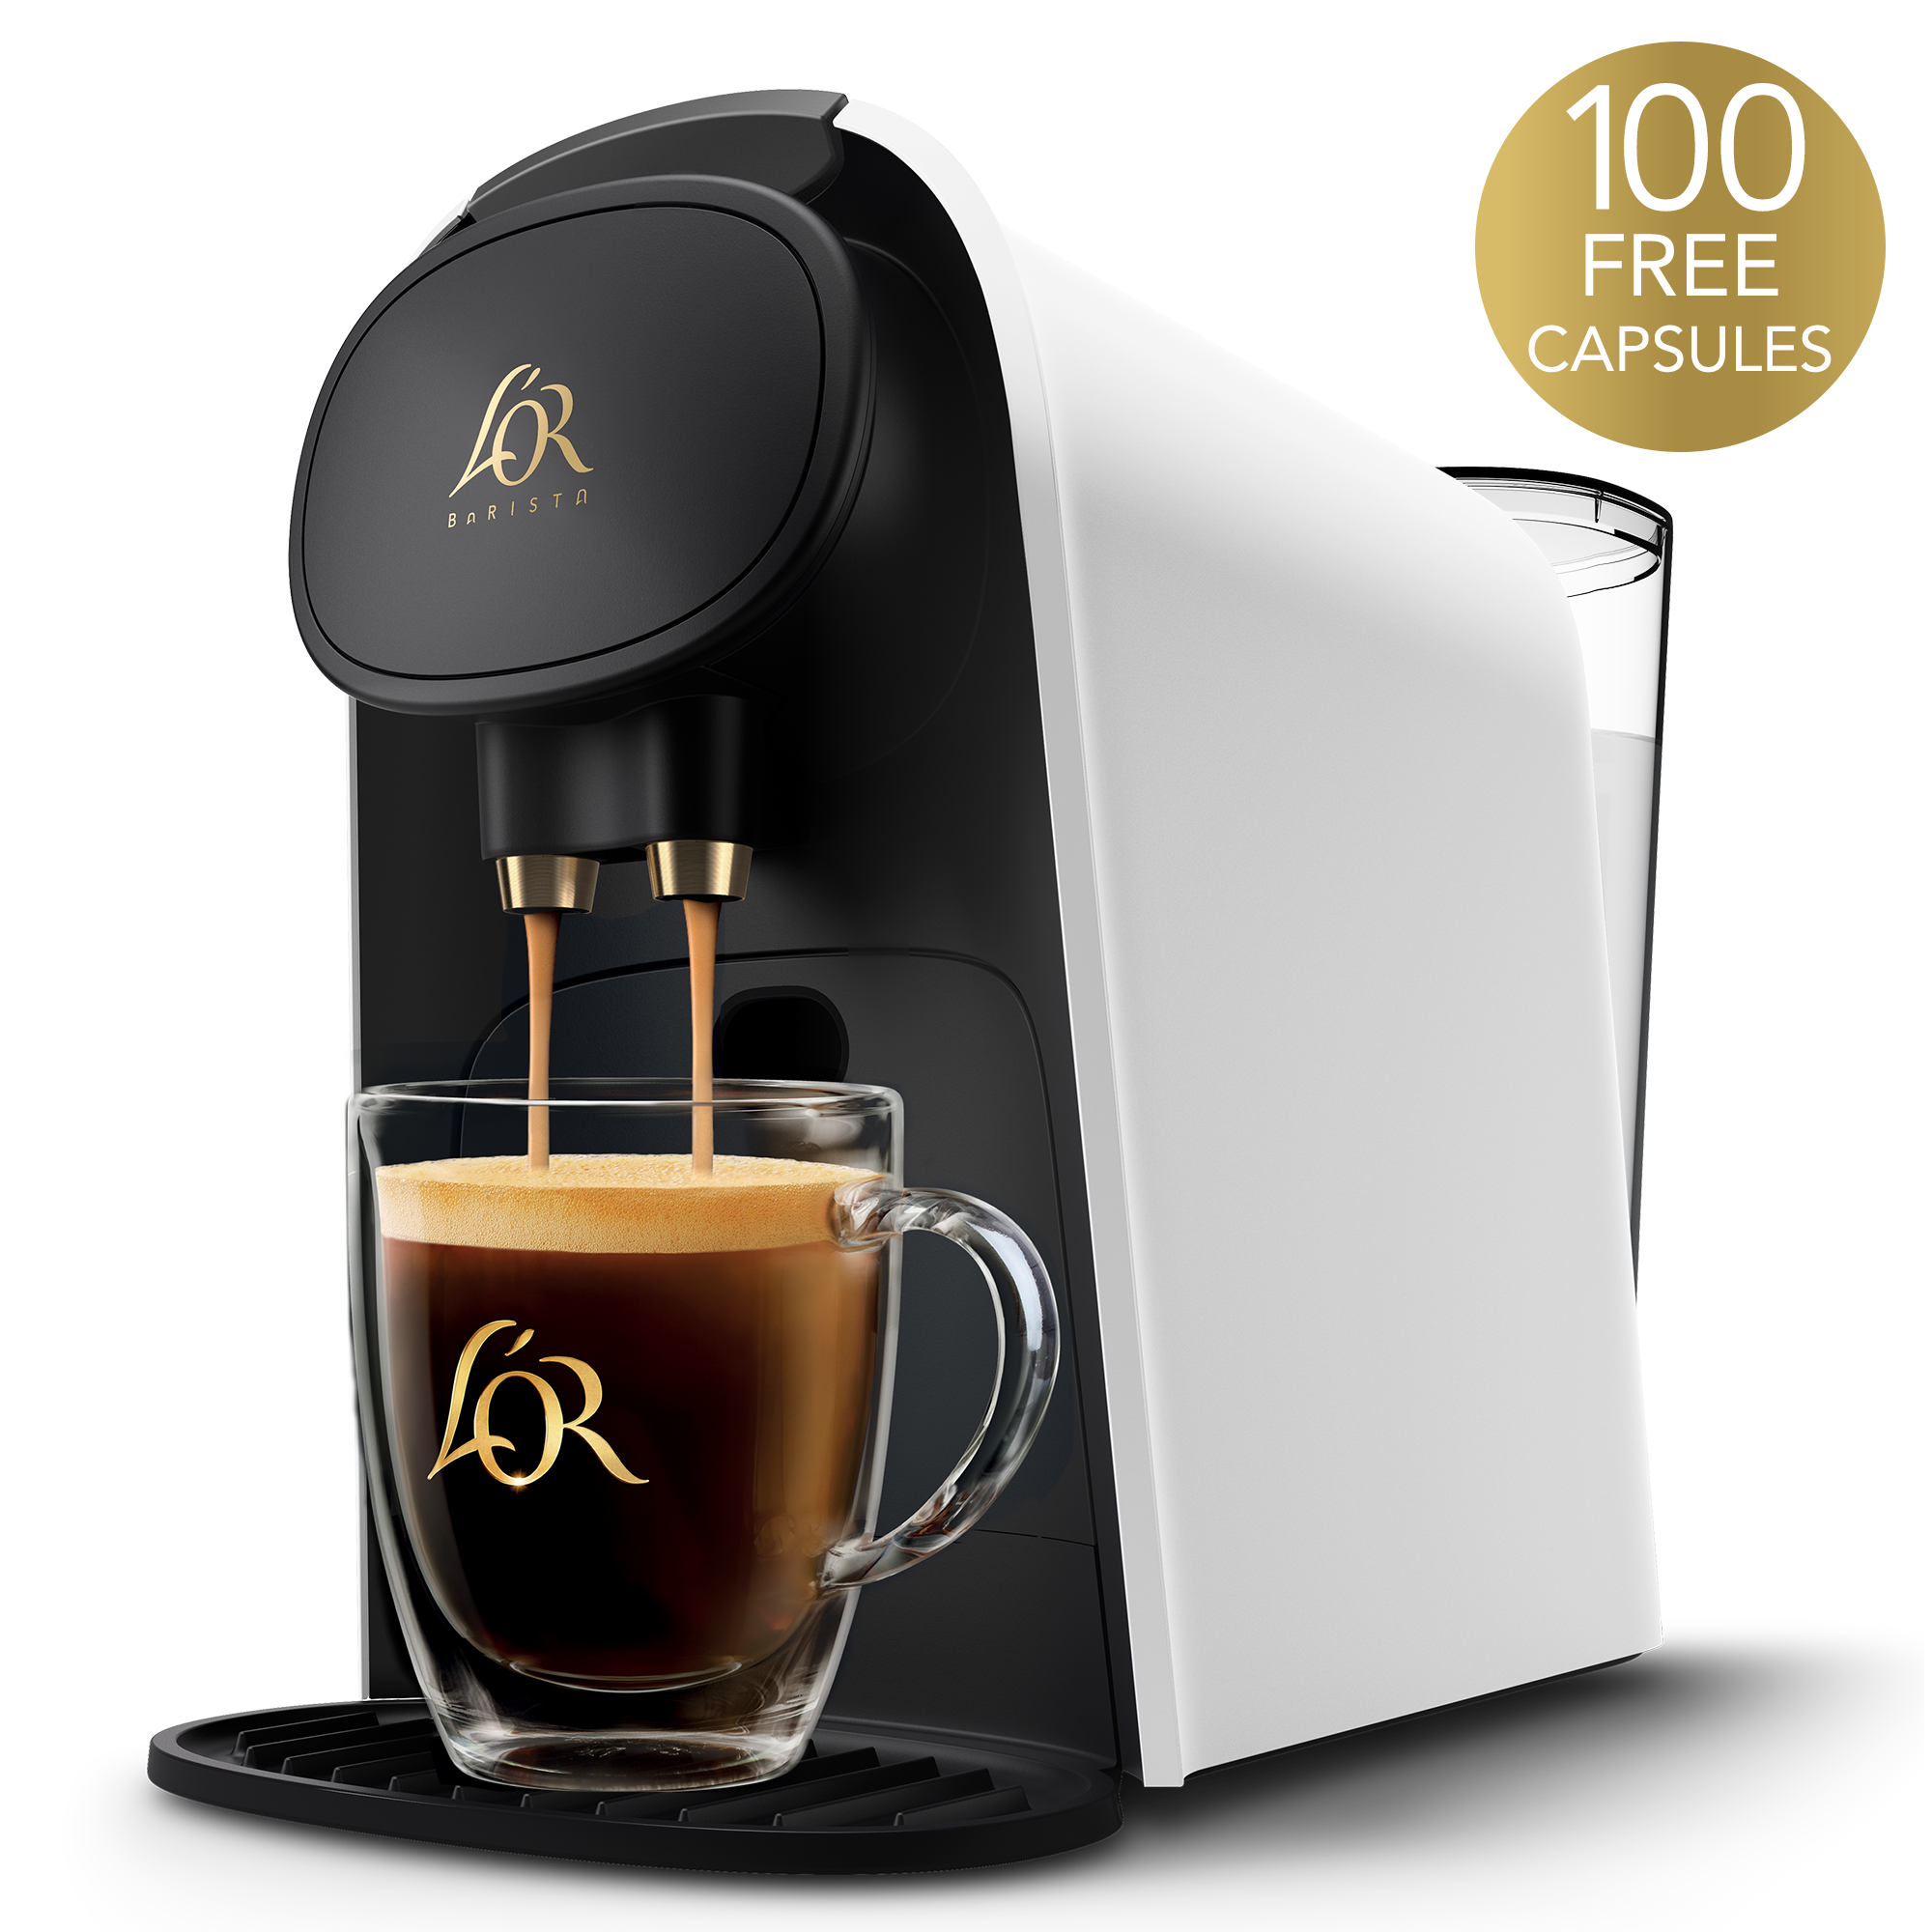 L'OR BARISTA System Satin Blanc Bundle with 100 Free Capsules